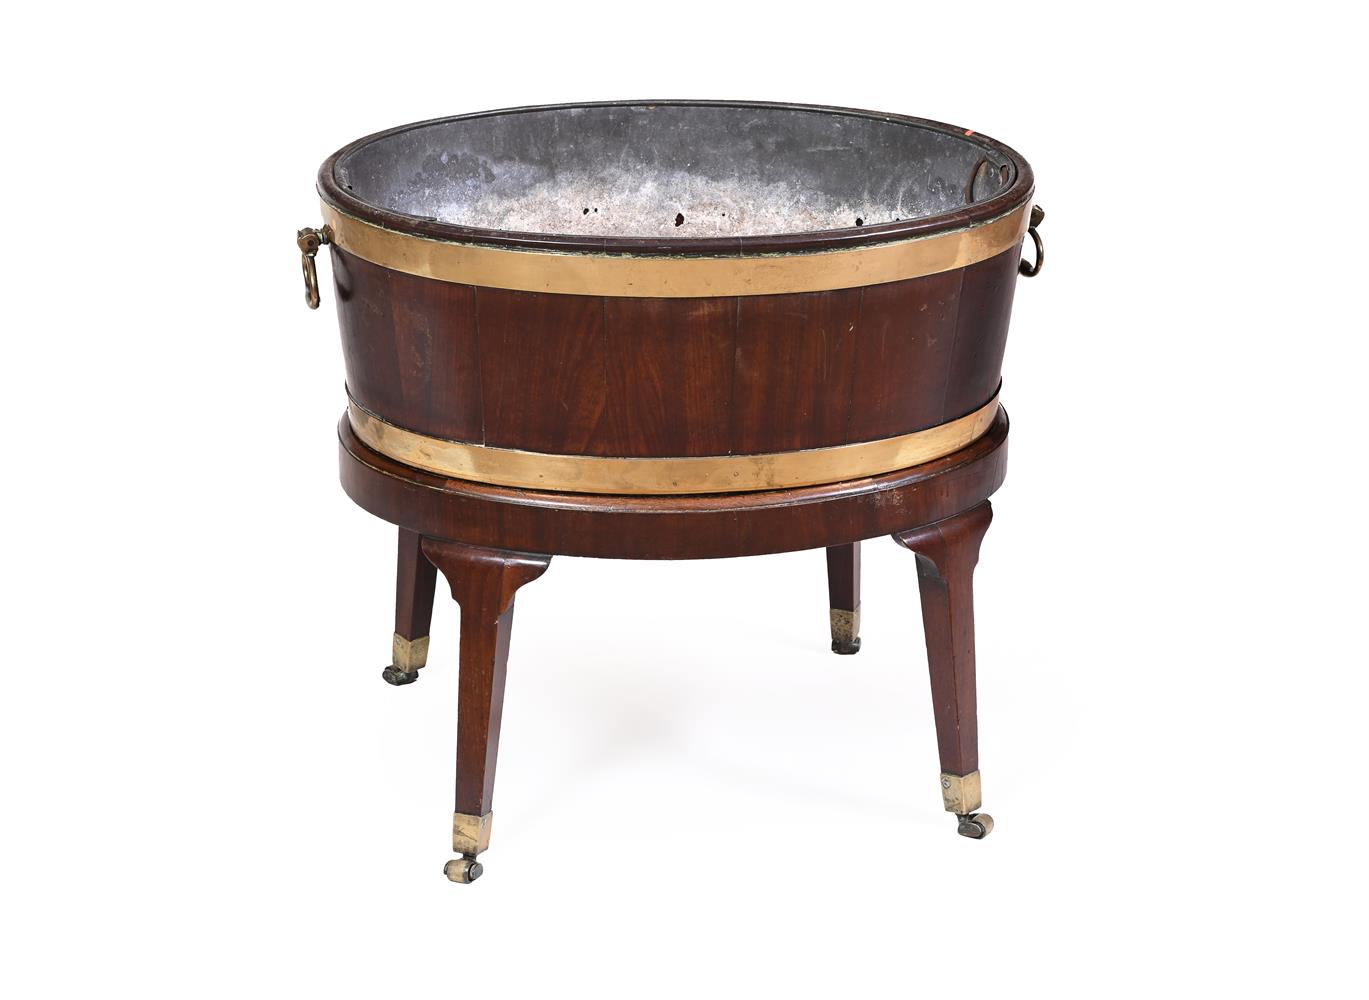 A GEORGE III MAHOGANY AND BRASS BOUND WINE COOLER ON STAND, CIRCA 1780 - Image 2 of 2